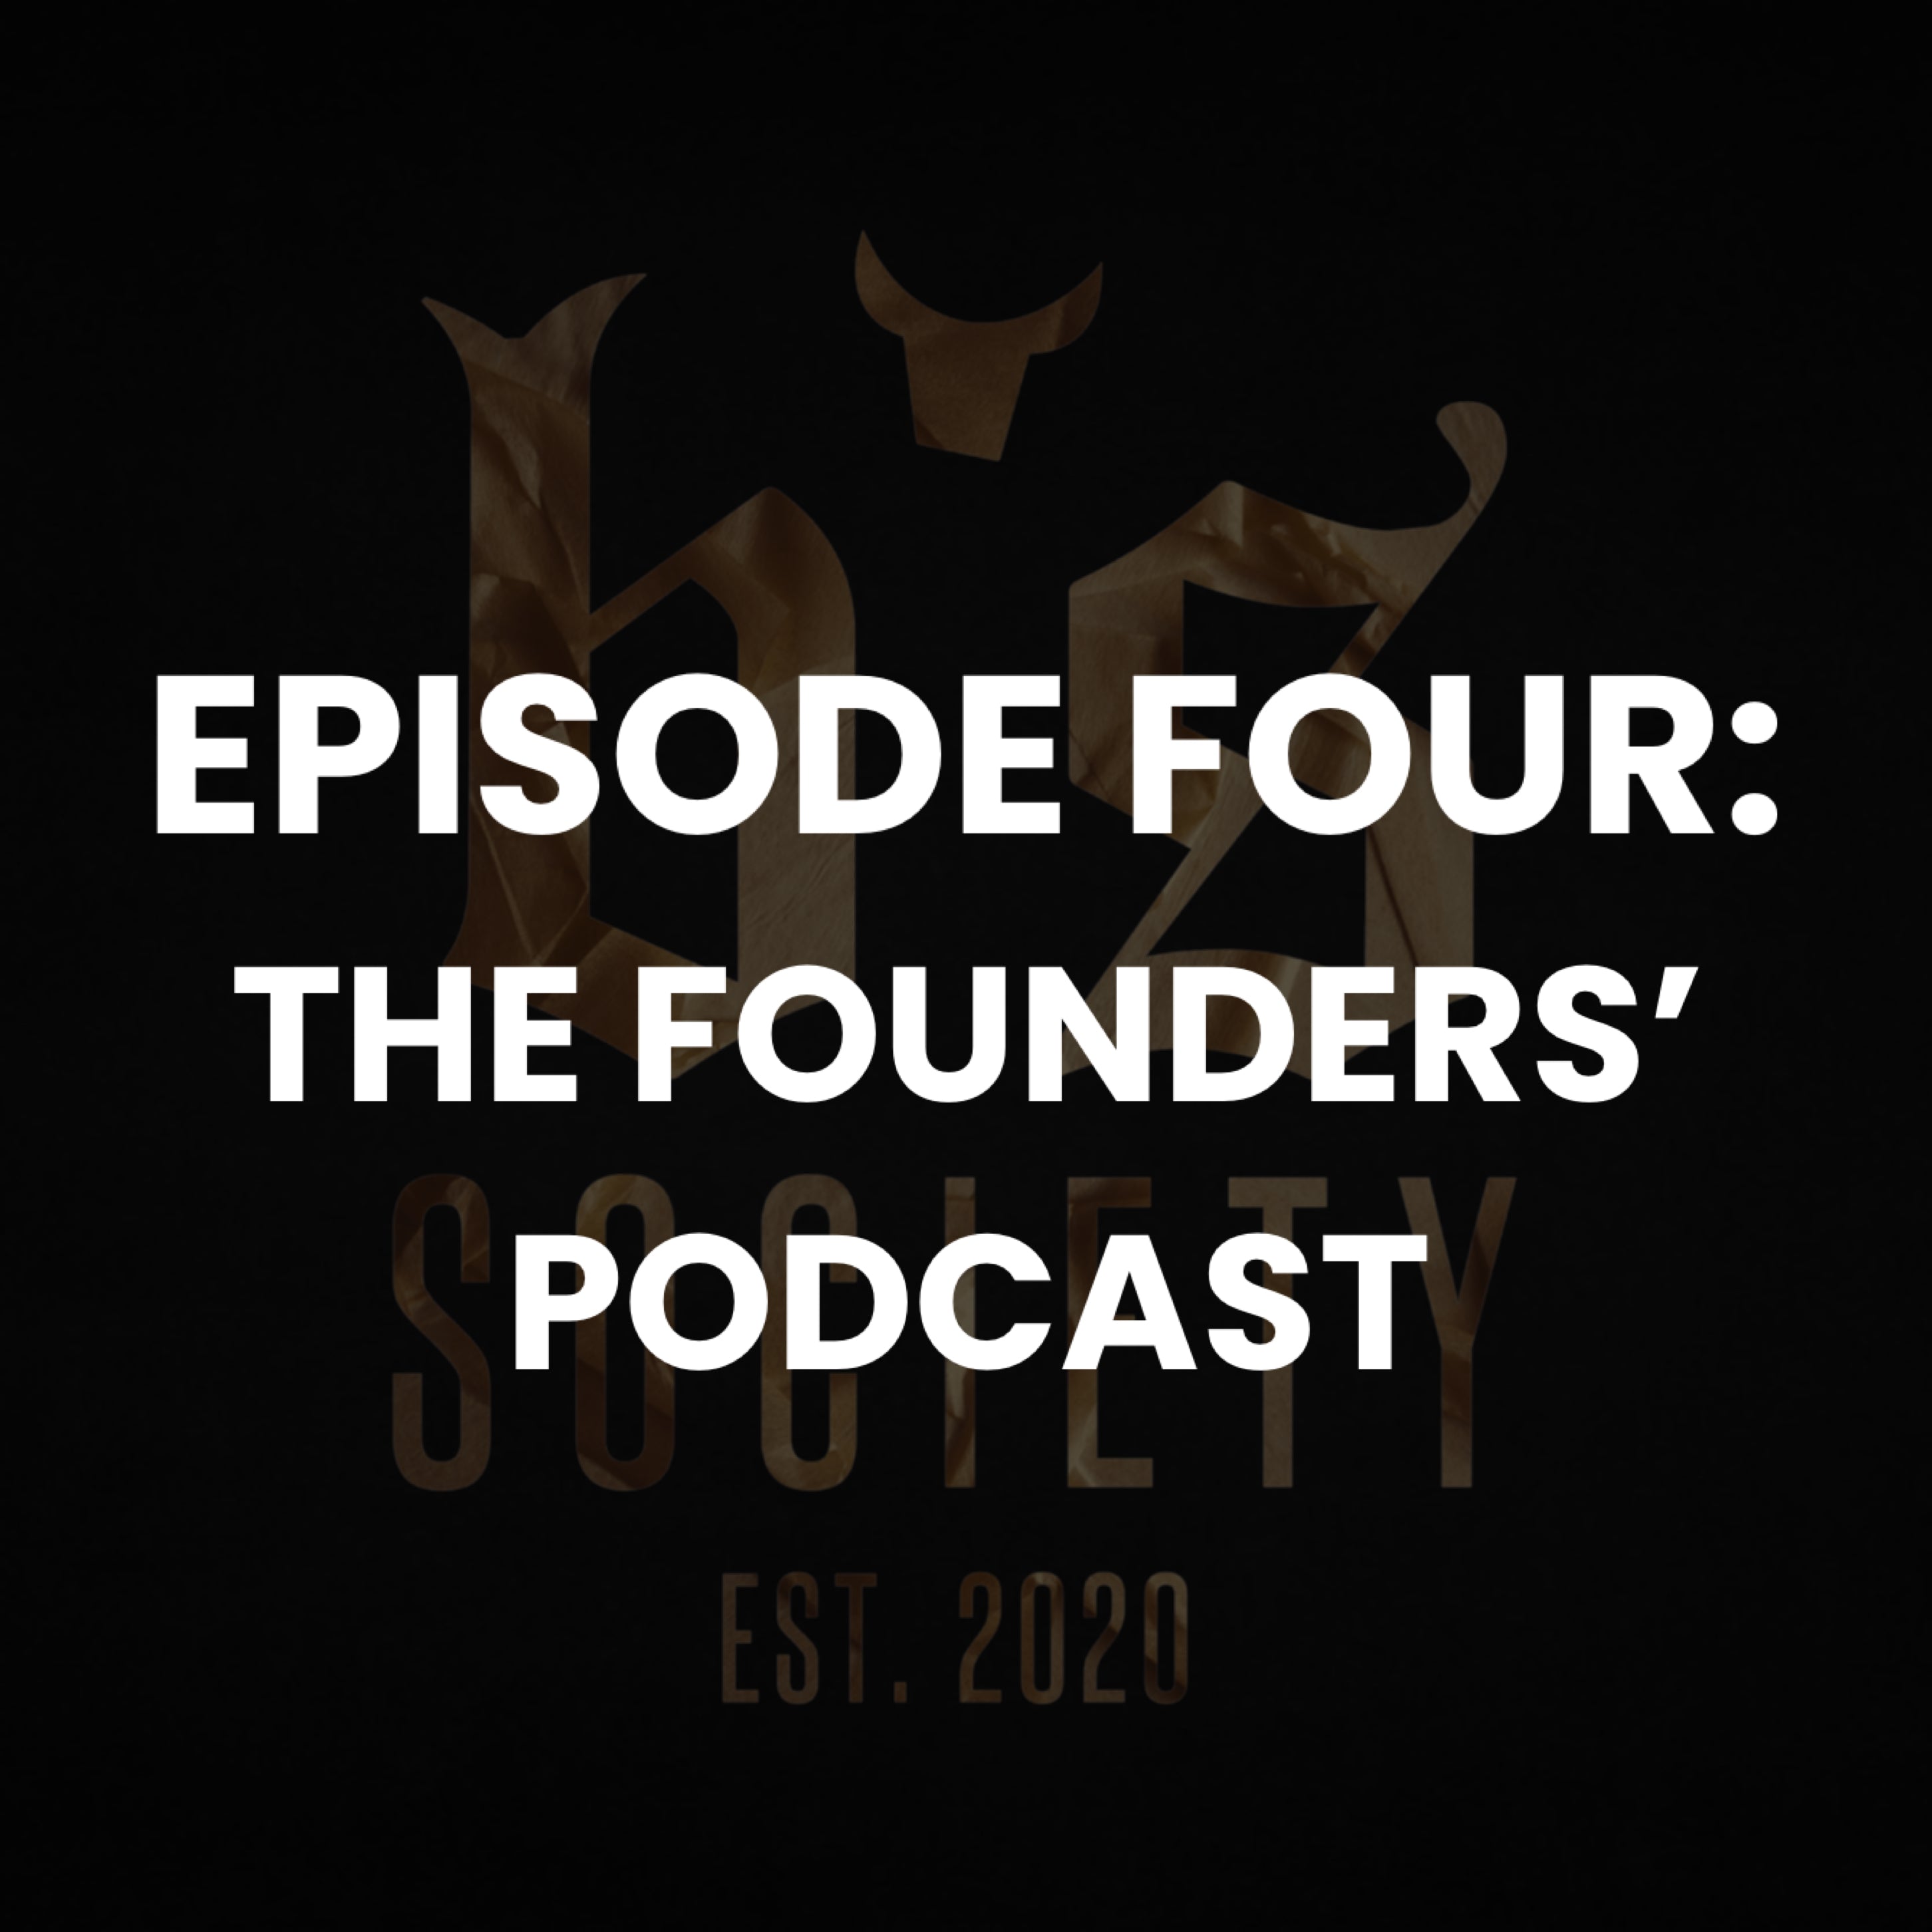 EPISODE 4: THE FOUNDERS' PODCAST